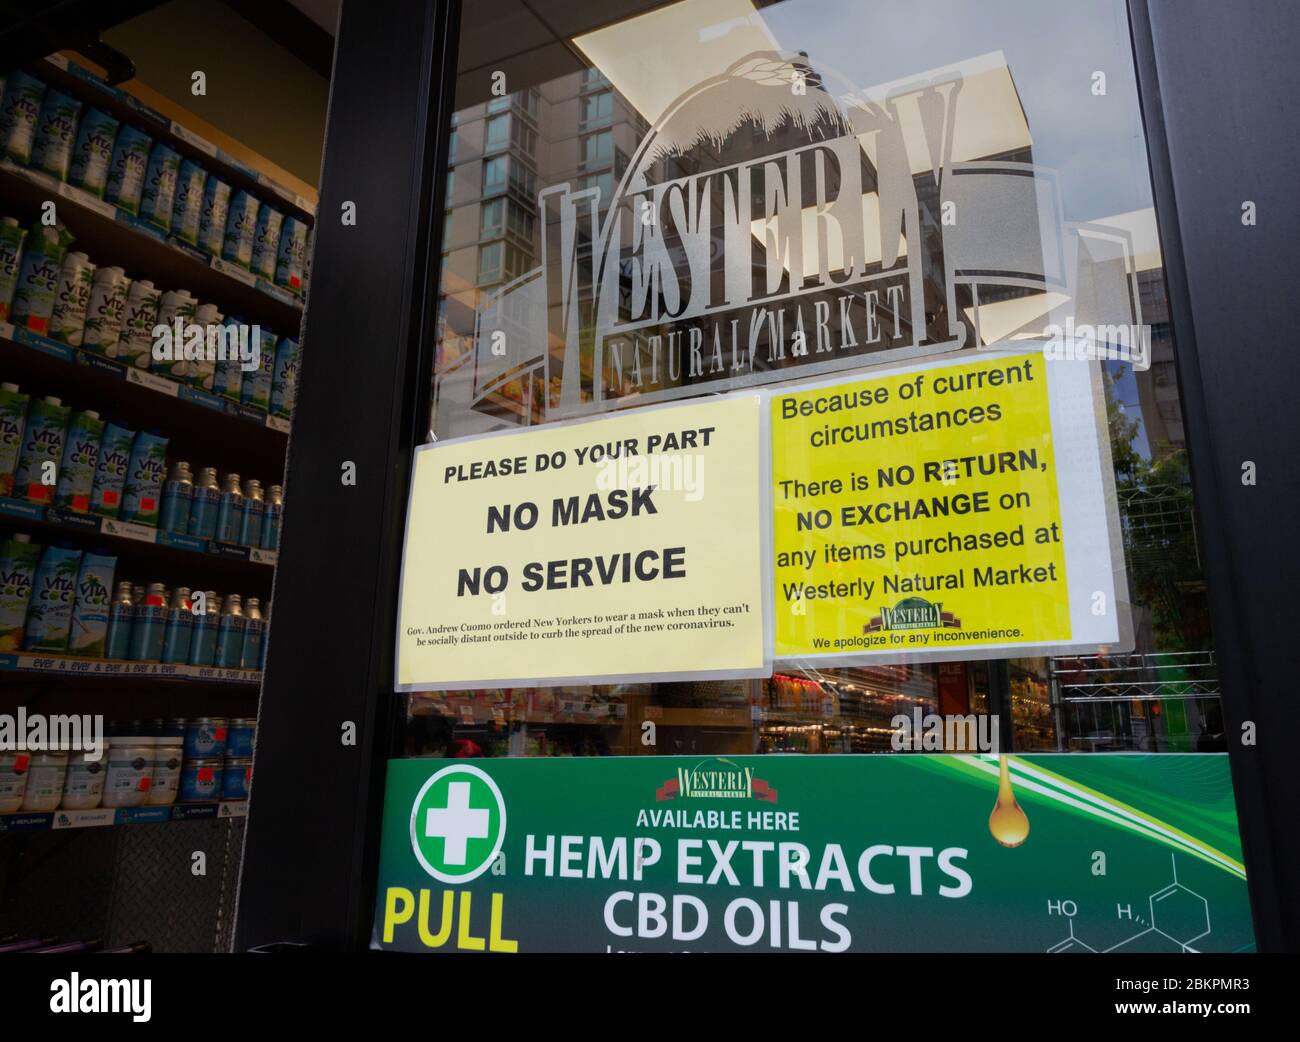 no mask, no service sign and stating no returns or exchanges on purchases at Westerly Natural Market due to the coronavirus or covid-19 pandemic. Stock Photo